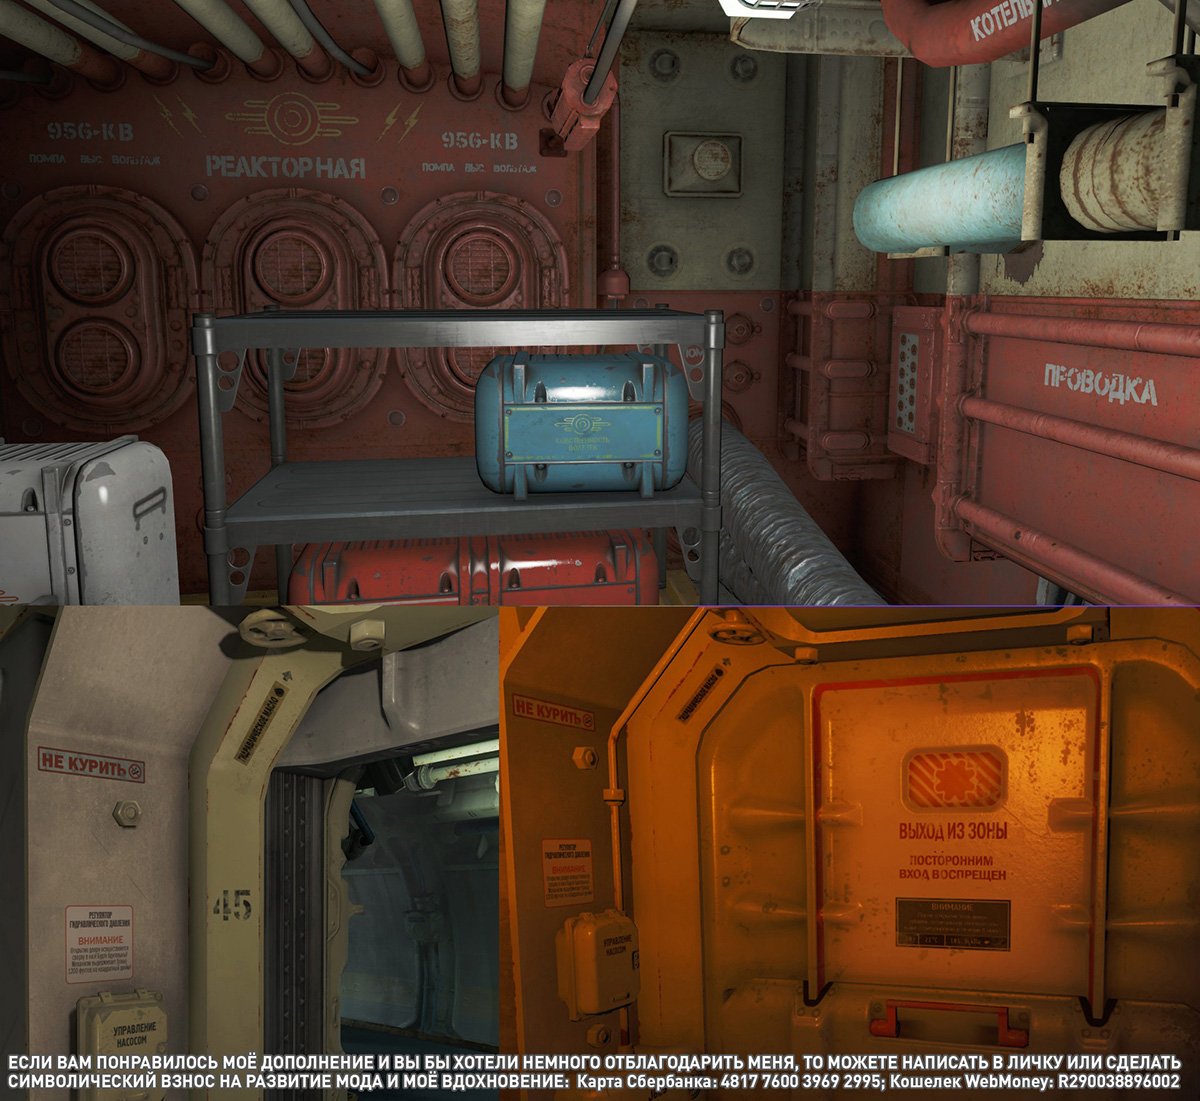 Generator textures from hiro special edition fallout 4 фото 2